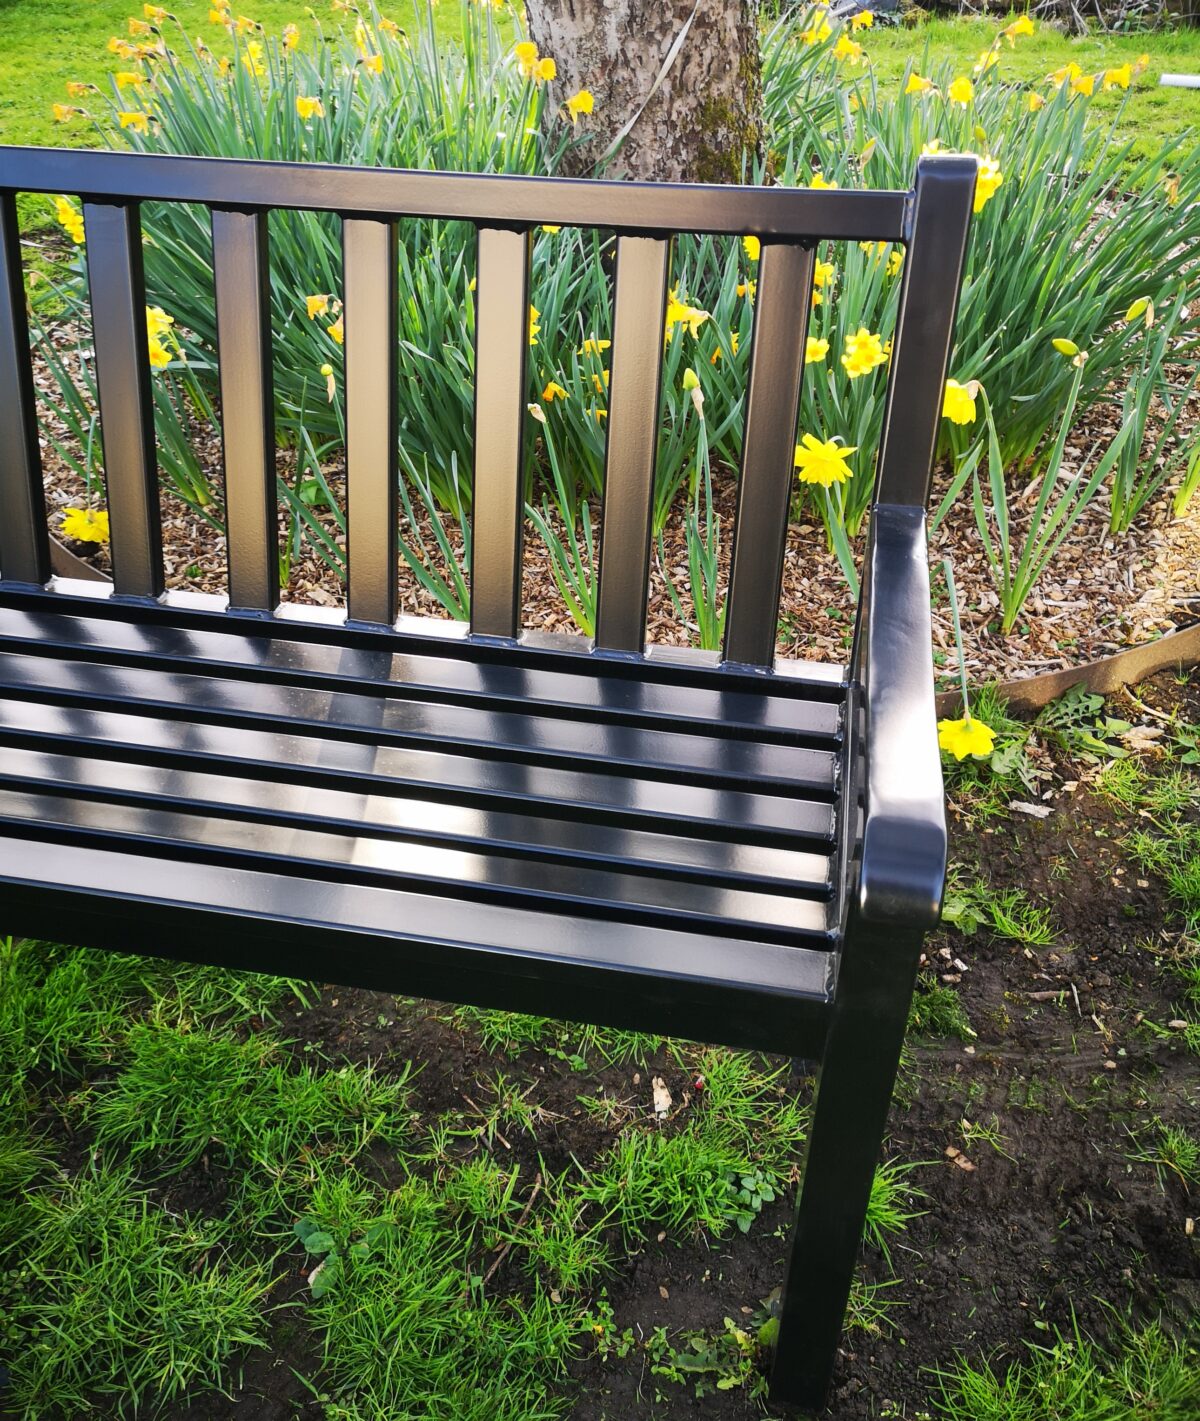 Bench Seat in front of daffodils